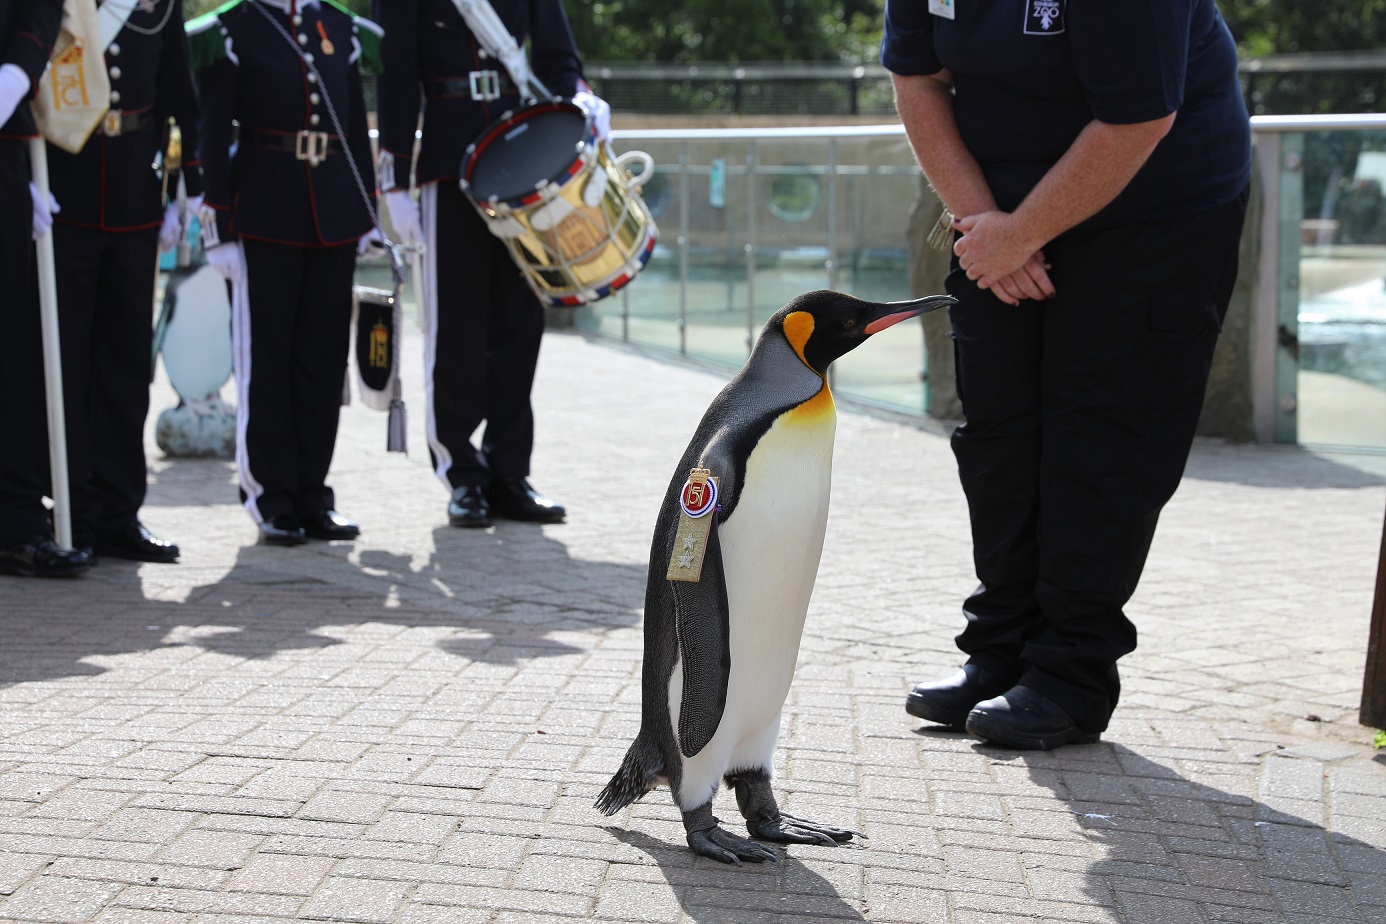 King penguin Sir Nils getting promoted by the Norwegian King's Guard IMAGE: Rhiordan Langan-Fortune 2023